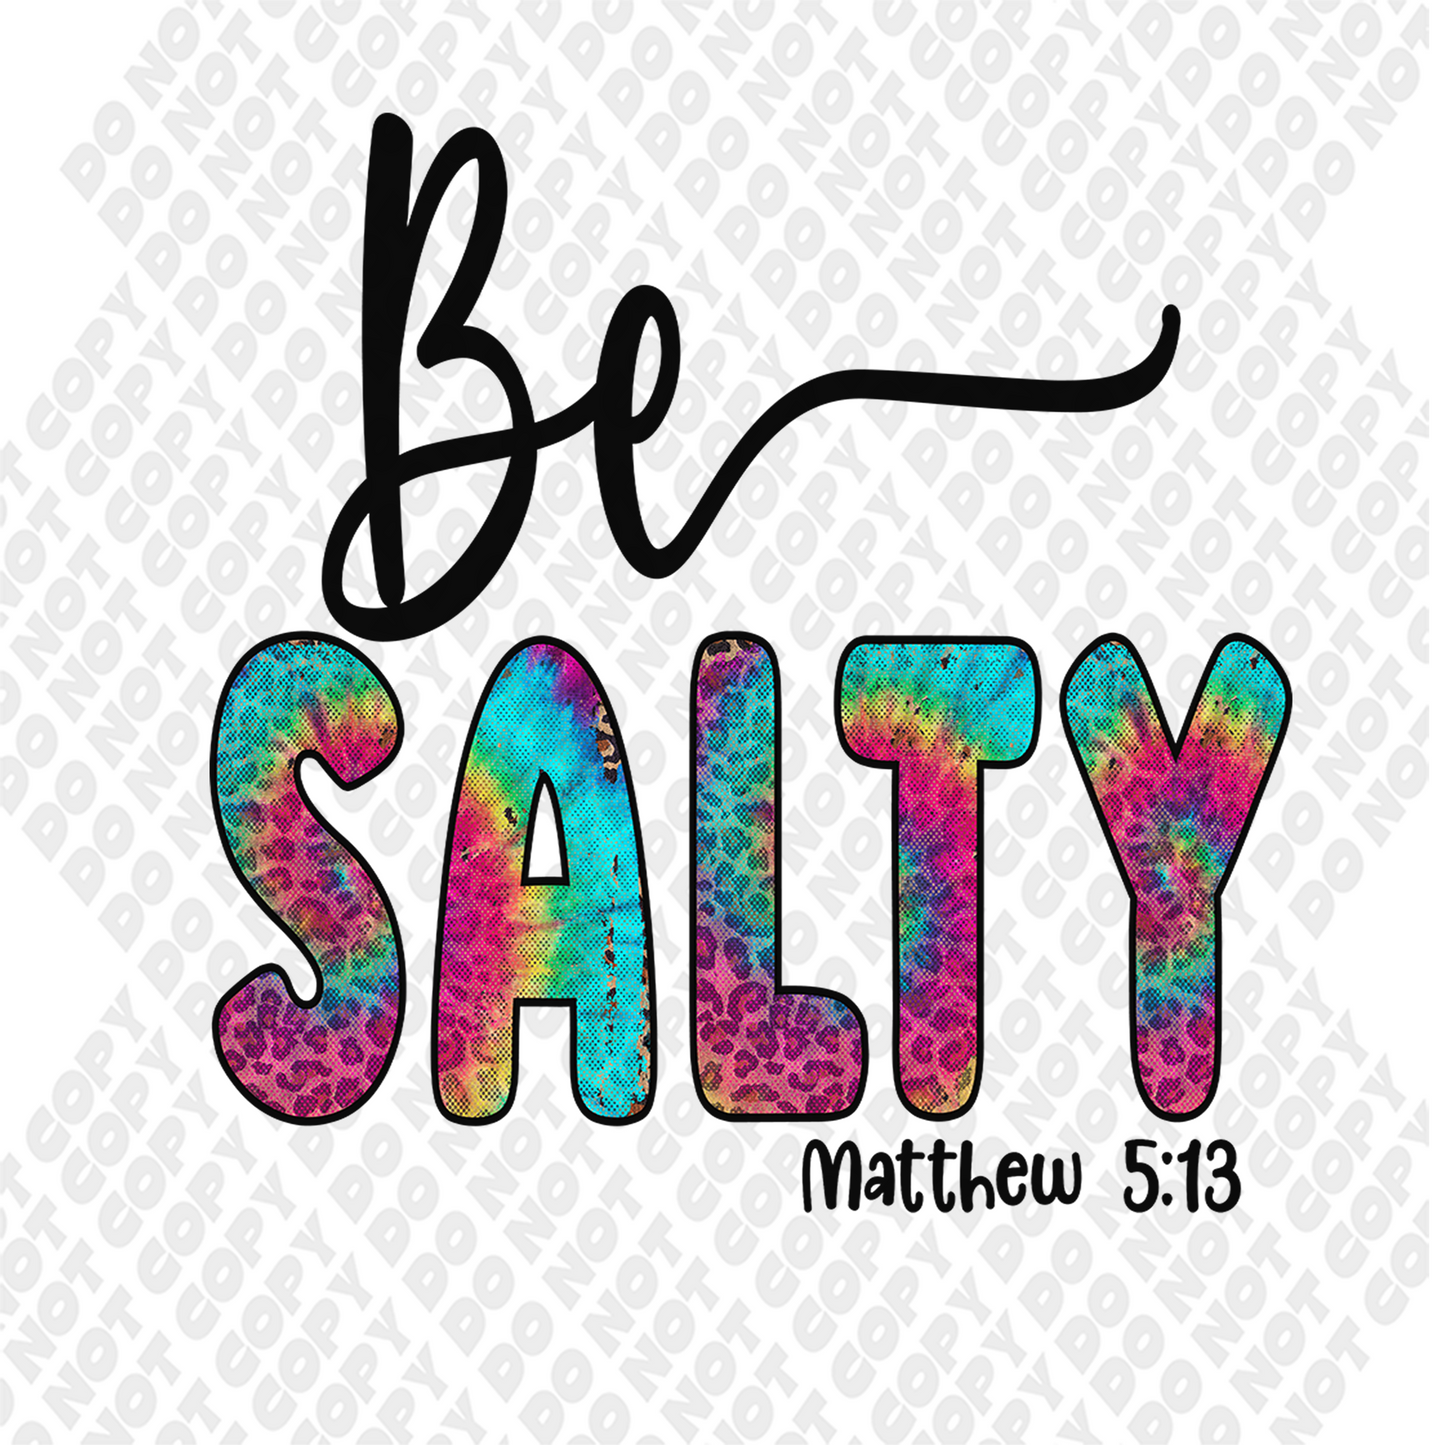 Be Salty